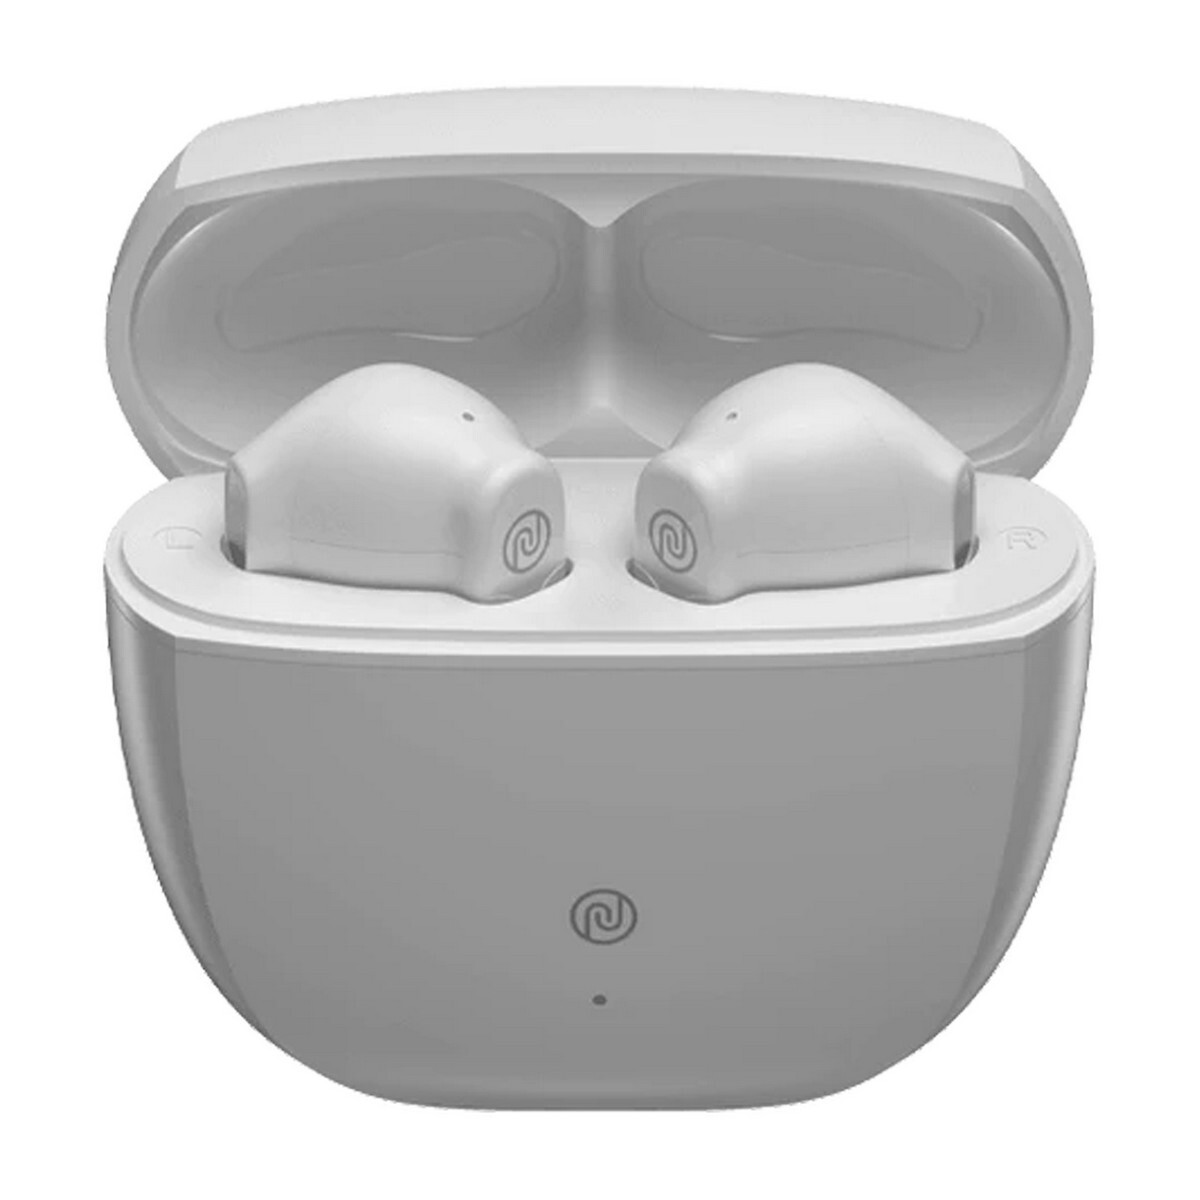 Noise Ace Truly Wireless Earbuds Snow White